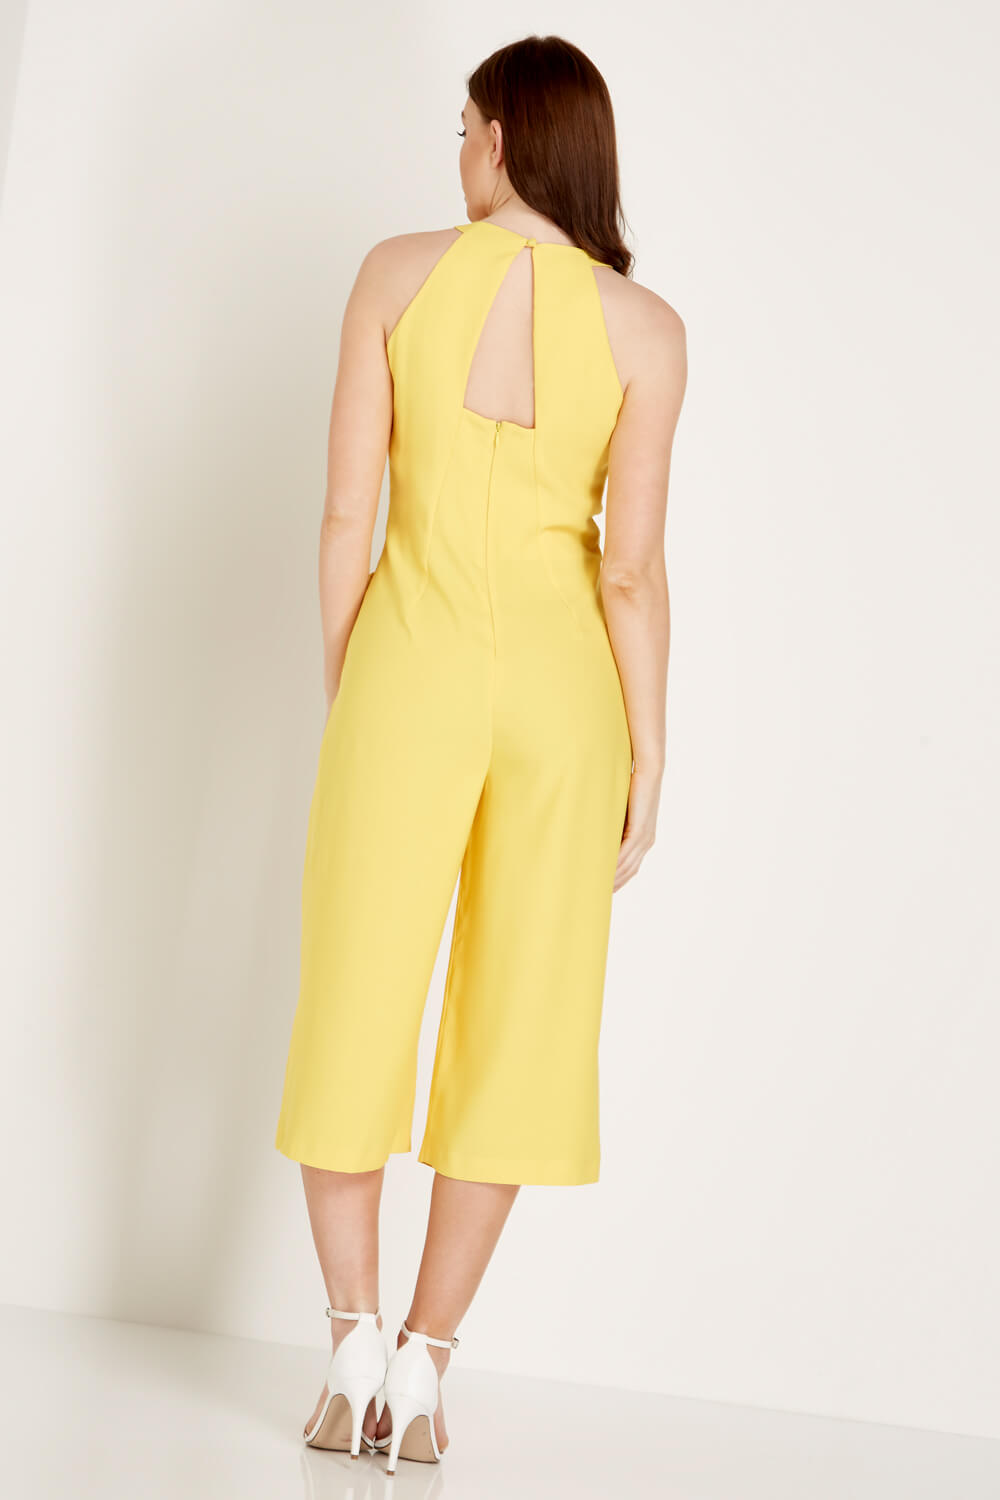 Yellow Halter Neck Culotte Jumpsuit, Image 2 of 4